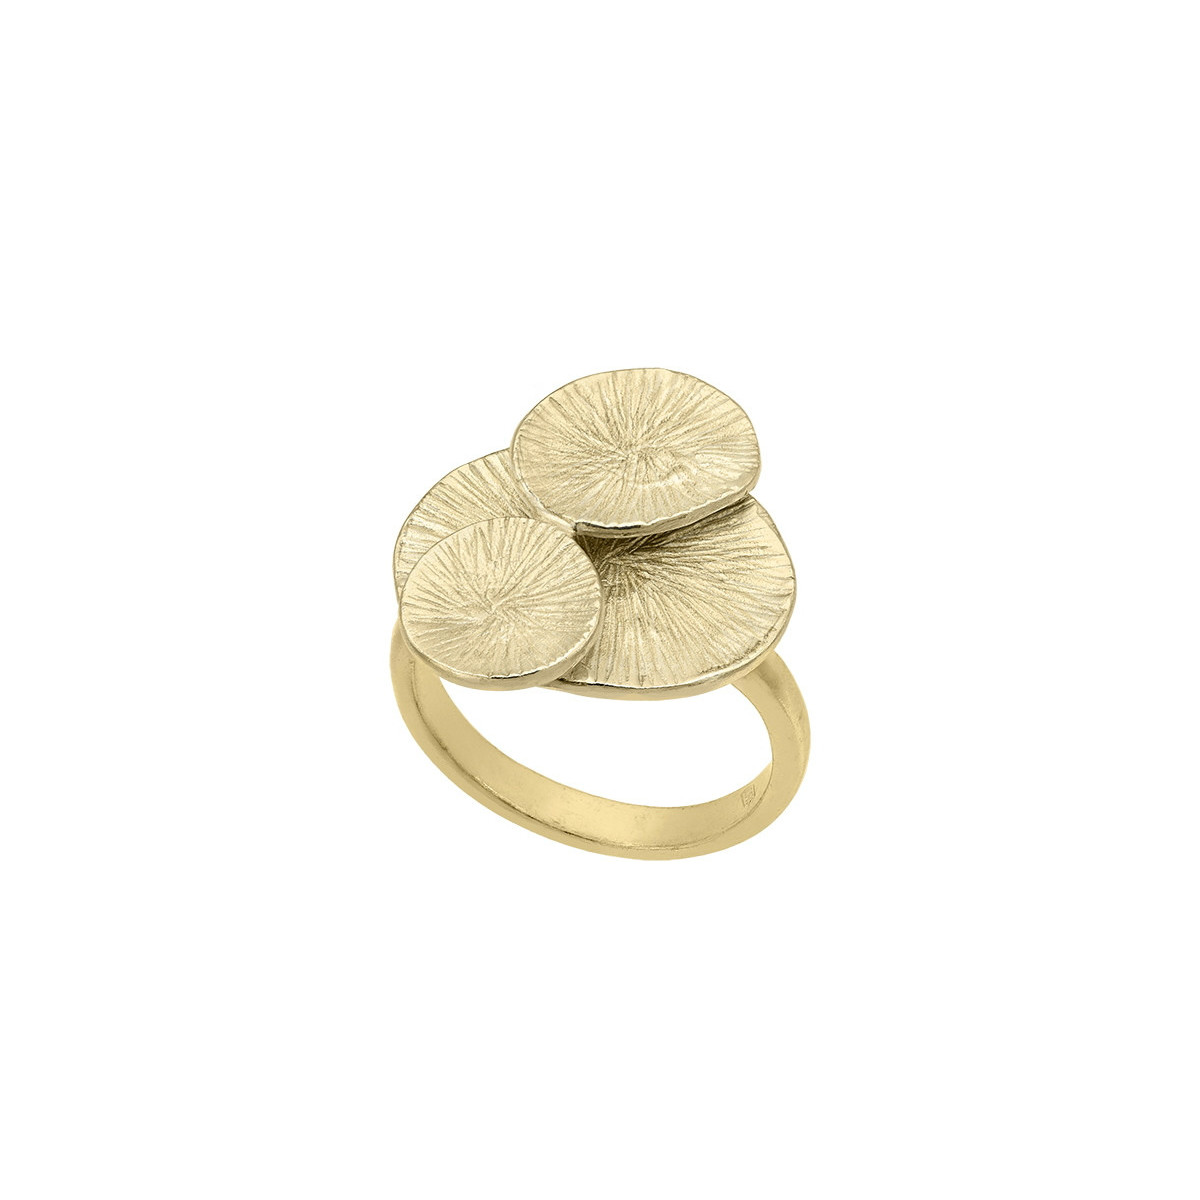 LILY Ring in Silver. 18k Gold Vermeil